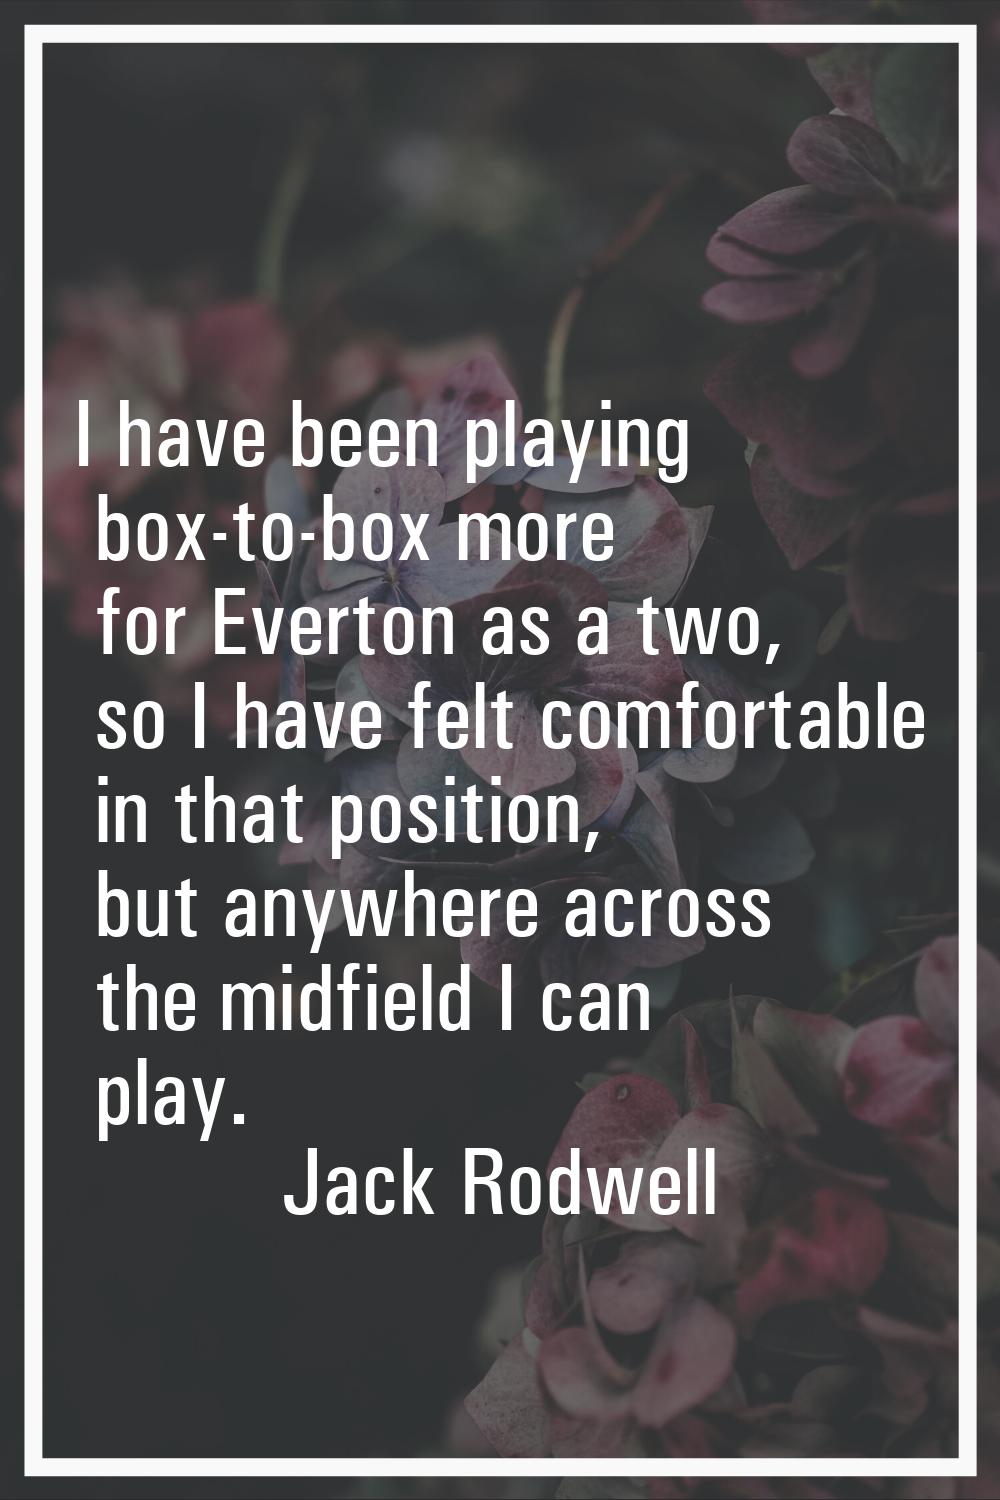 I have been playing box-to-box more for Everton as a two, so I have felt comfortable in that positi